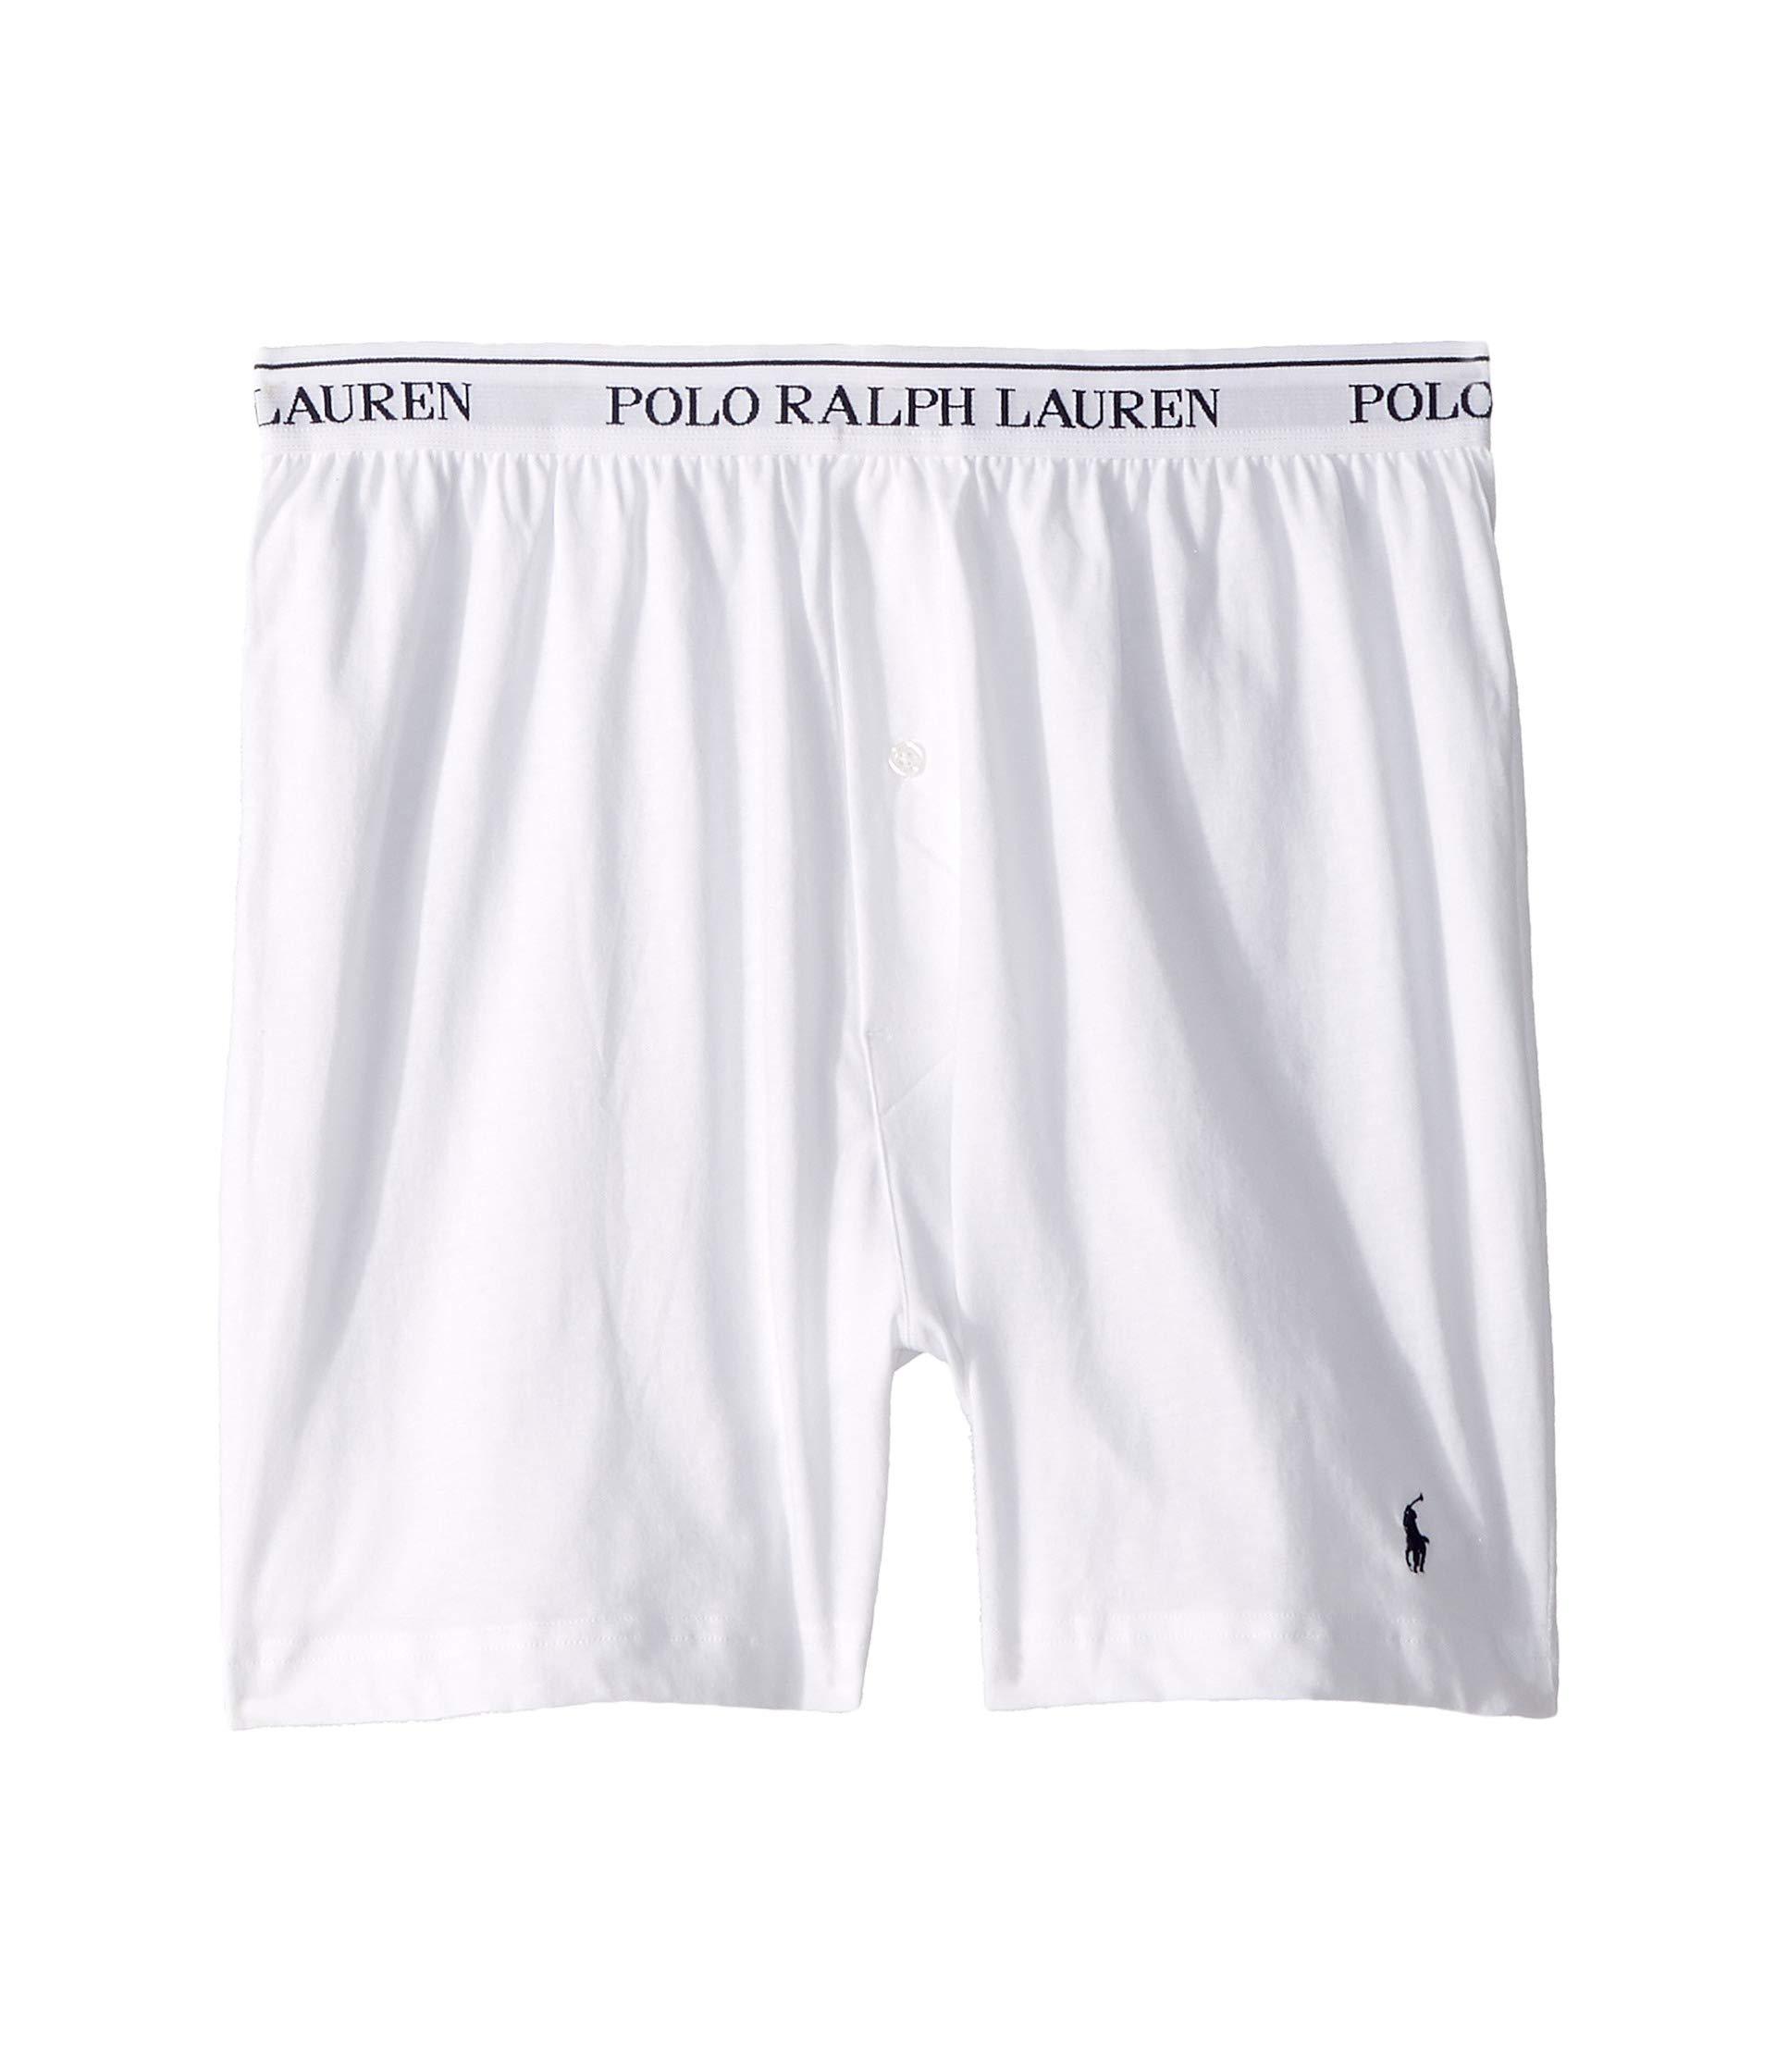 Polo Ralph Lauren Cotton Classic Fit W/ Wicking 3-pack Knit Boxers in ...